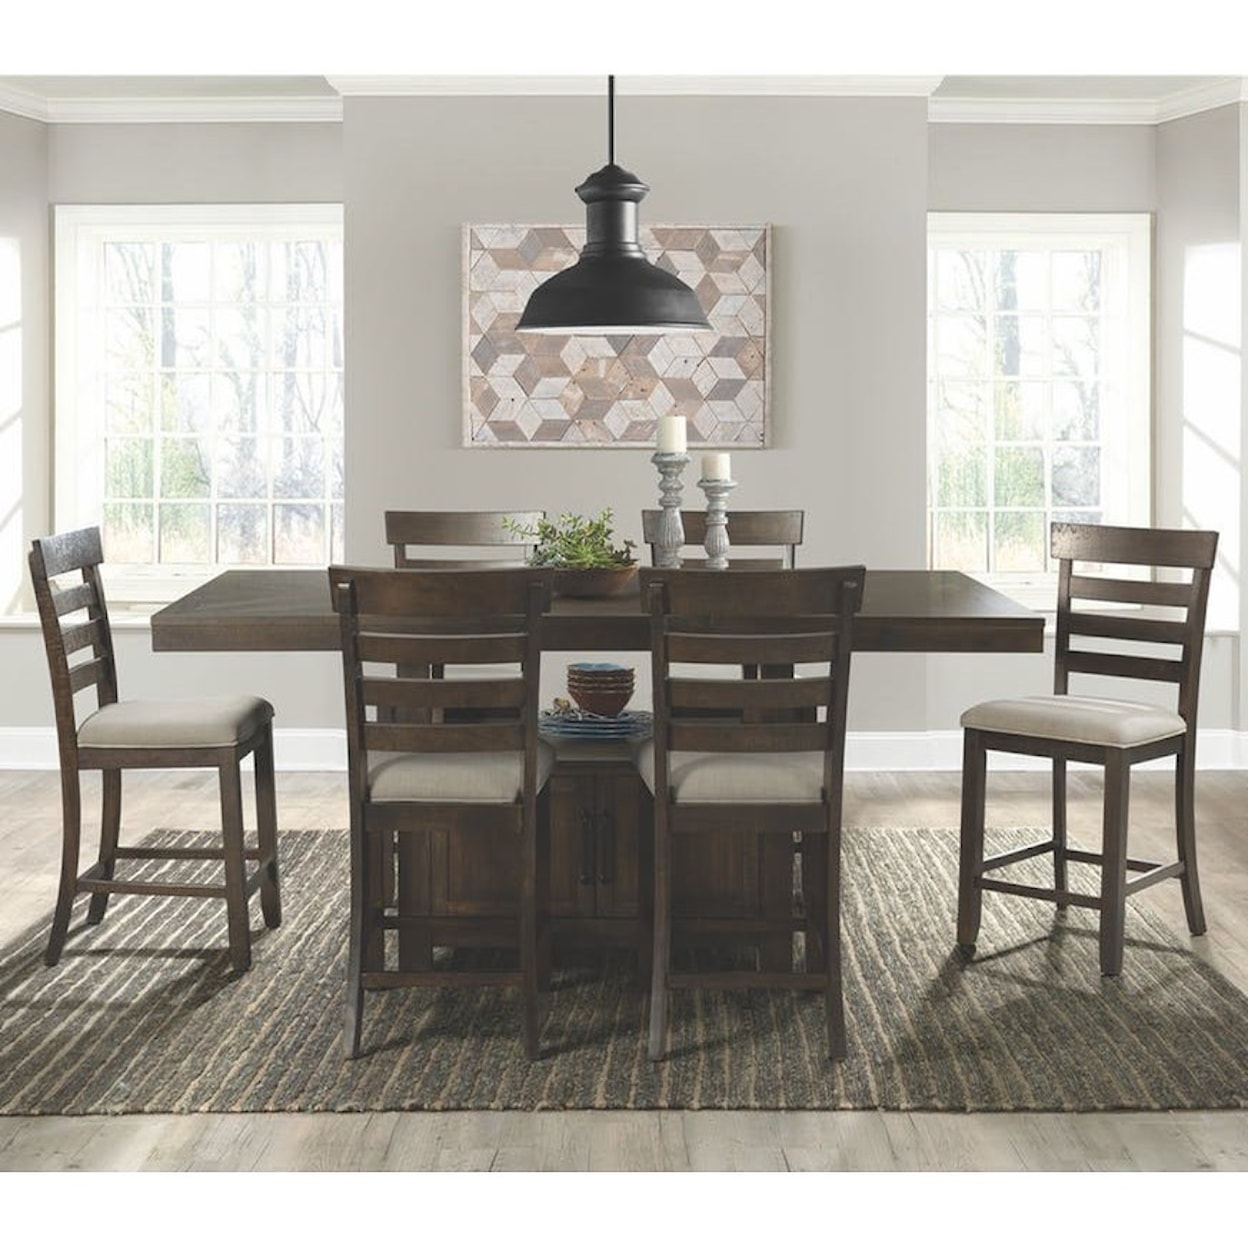 Elements Colorado Counter Height Dining Set